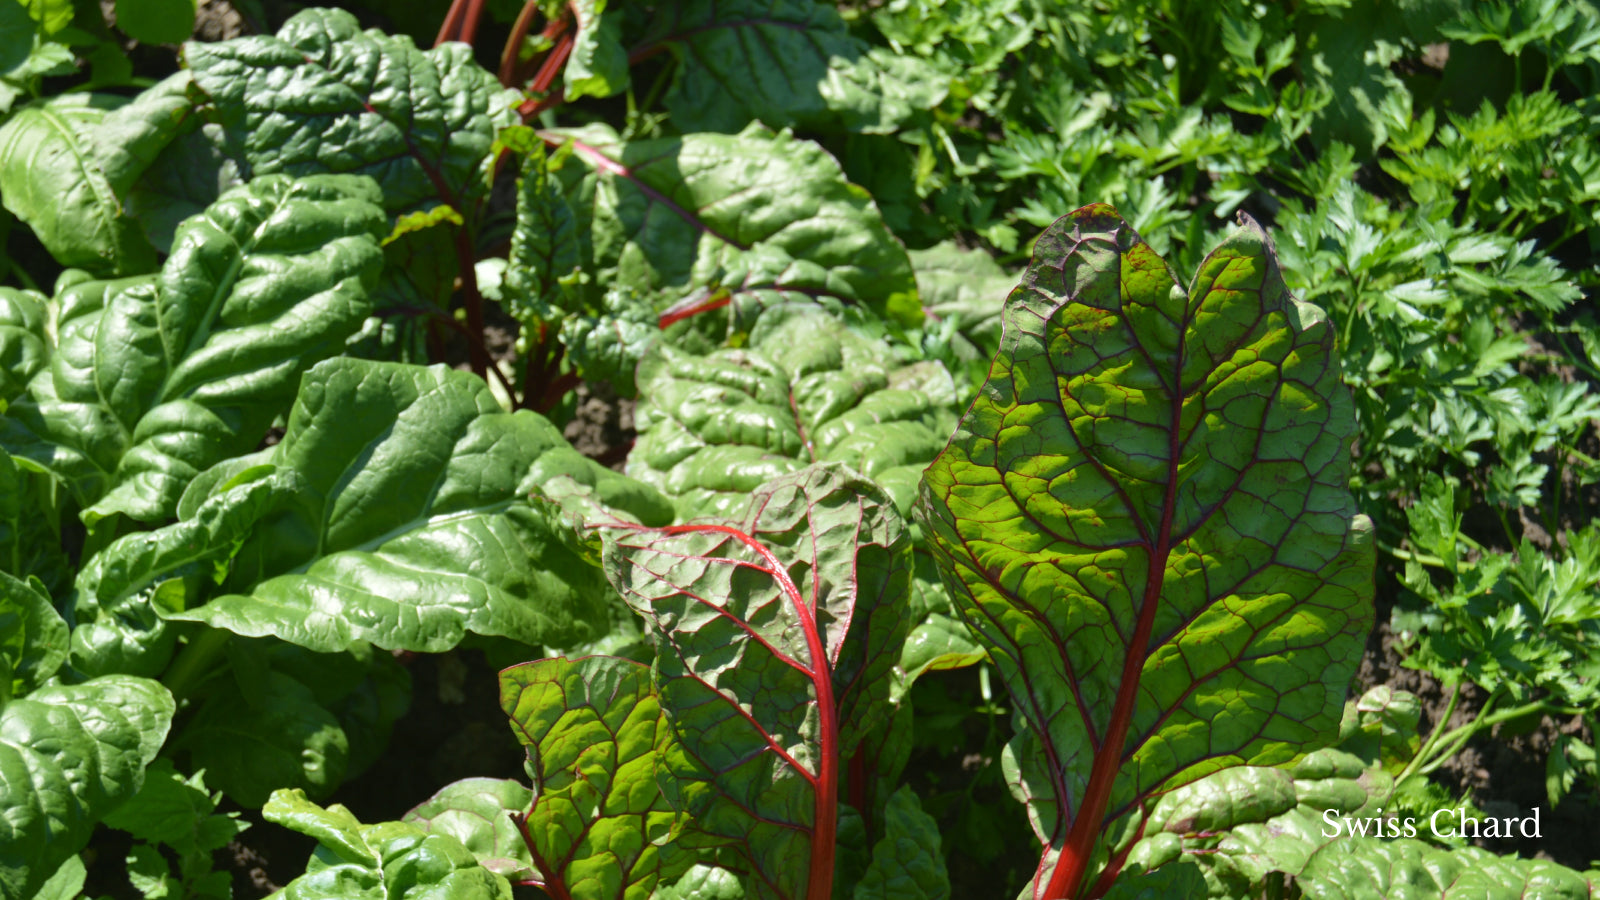 Swiss Chard leaves in the sunlight